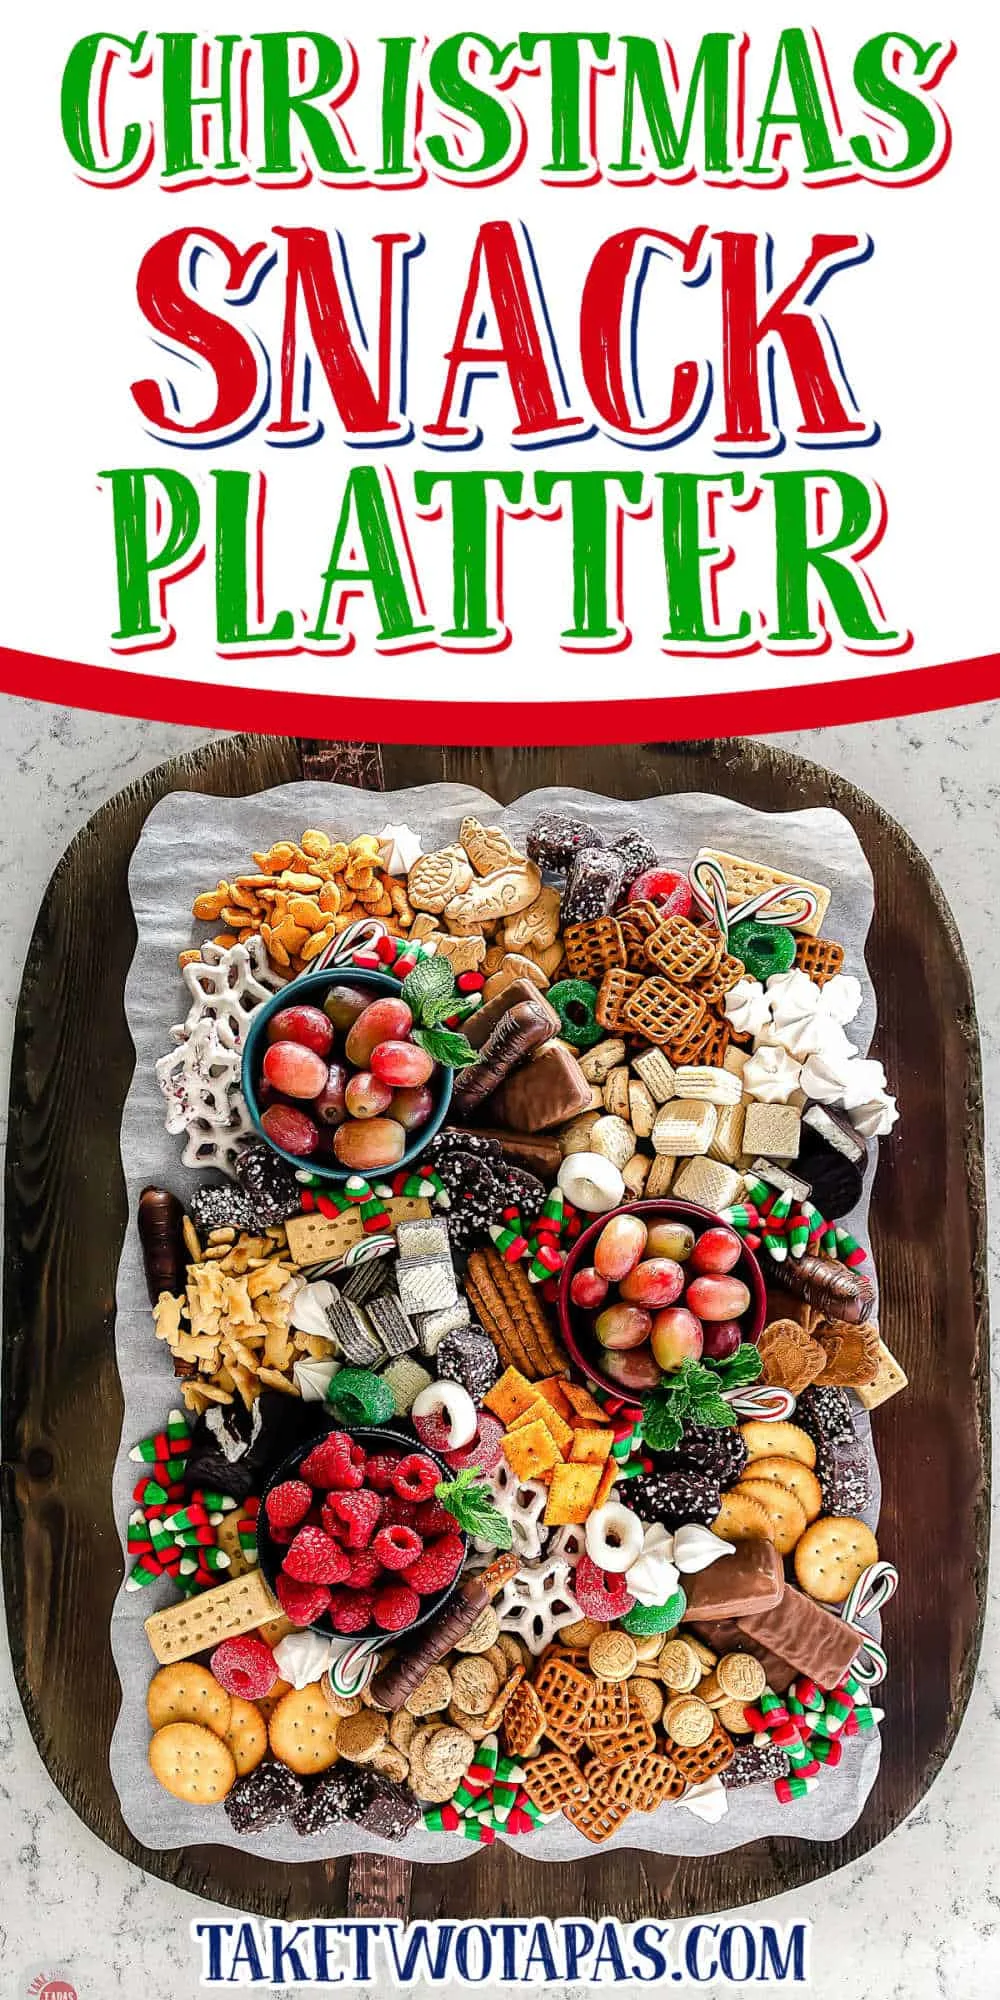 overhead picture of holiday snack platter for kids with text "Christmas Snack Platter"